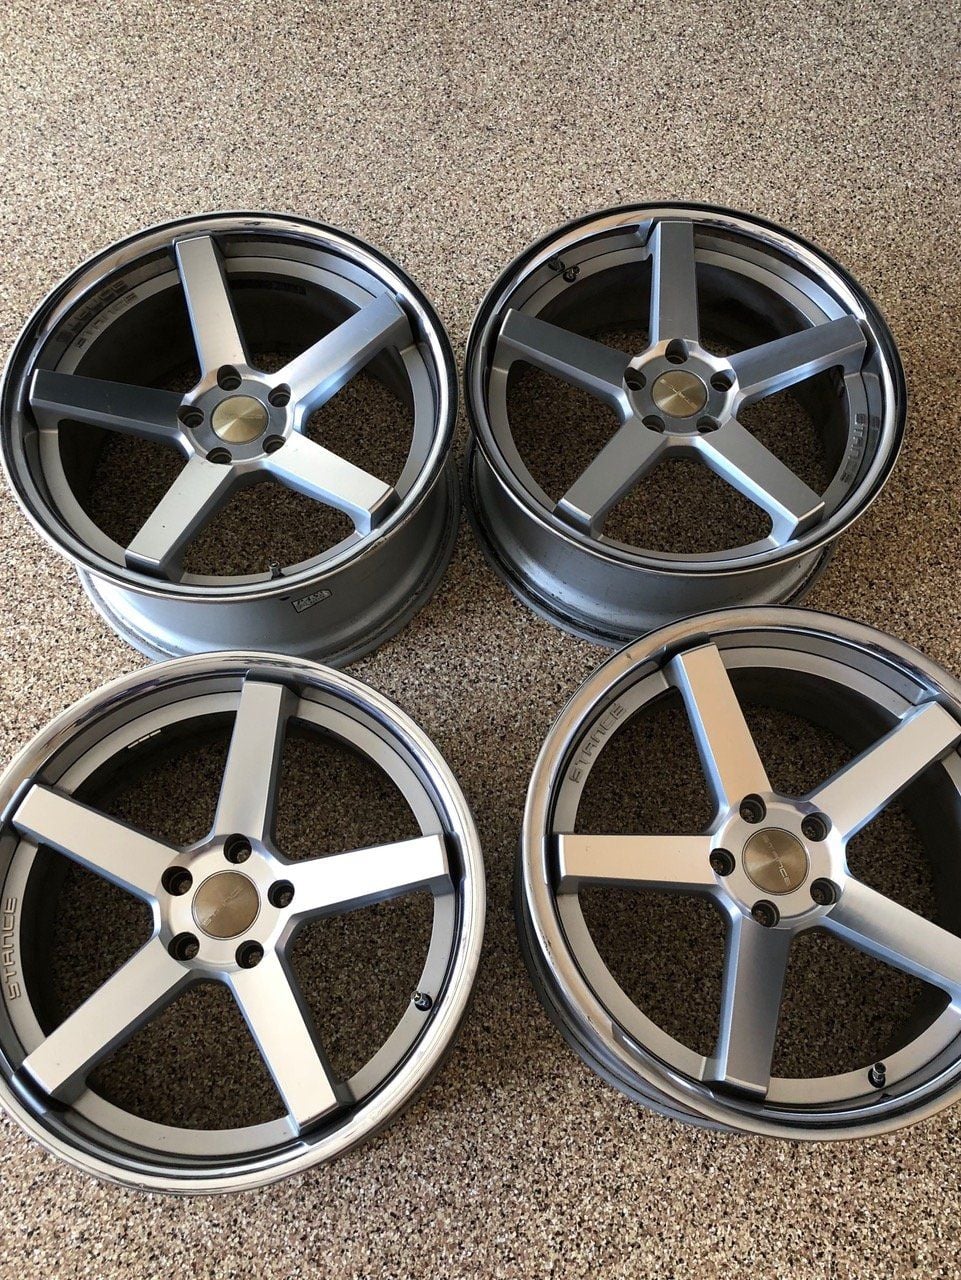 Wheels and Tires/Axles - Stance SC5 19" wheels in West Palm Beach, C class fitment cheap. Local pickup only. - Used - Palm Beach Gardens, FL 33418, United States